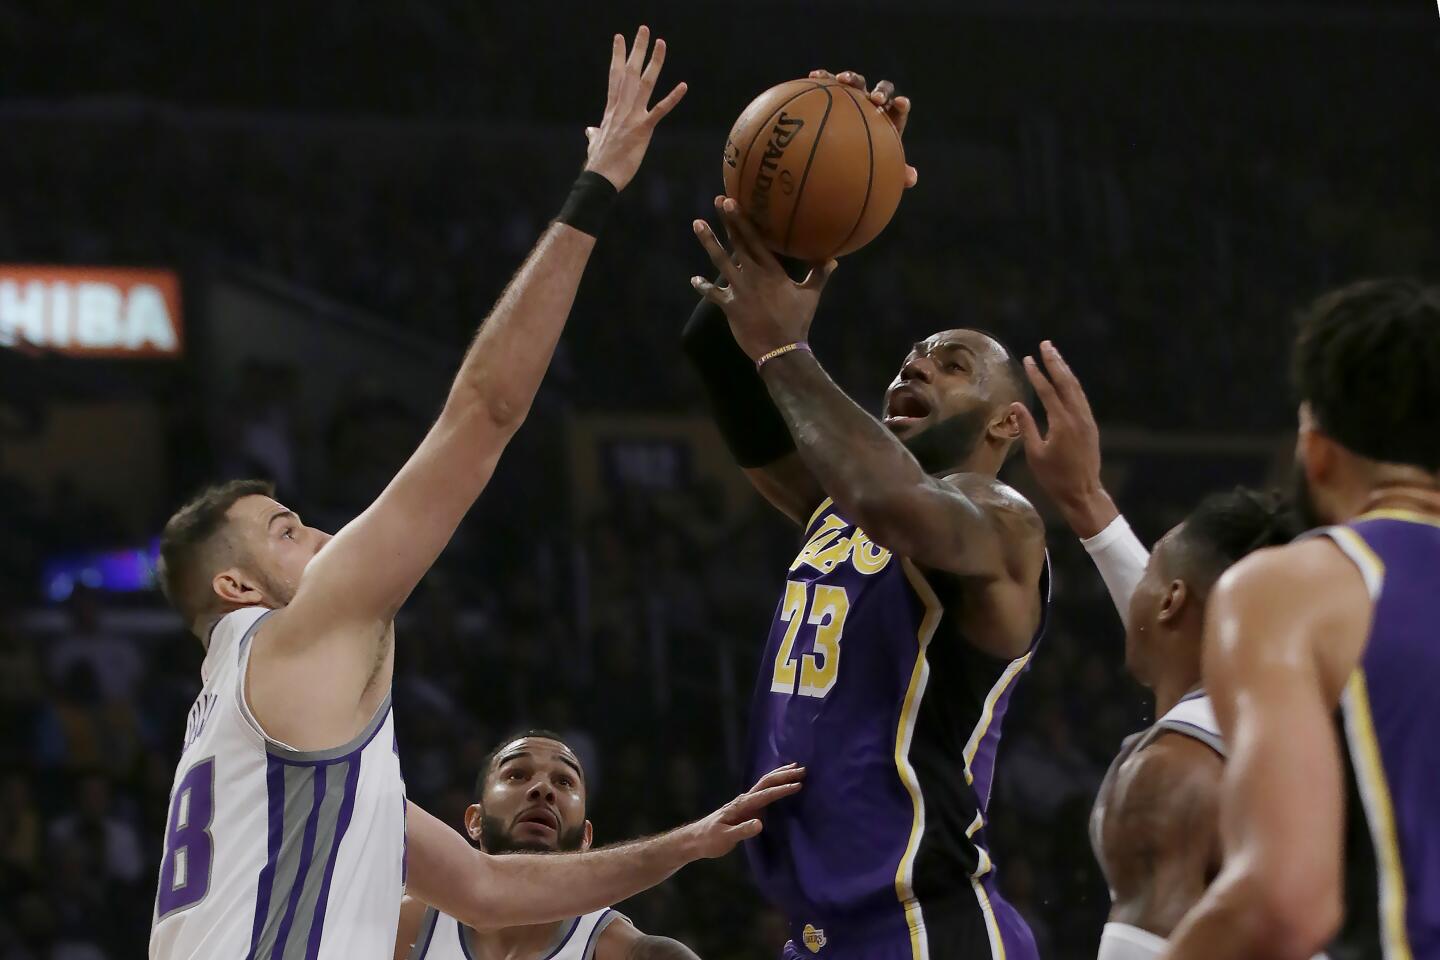 Lakers forward LeBron James, center, drives to the basket against the Sacramento Kings.